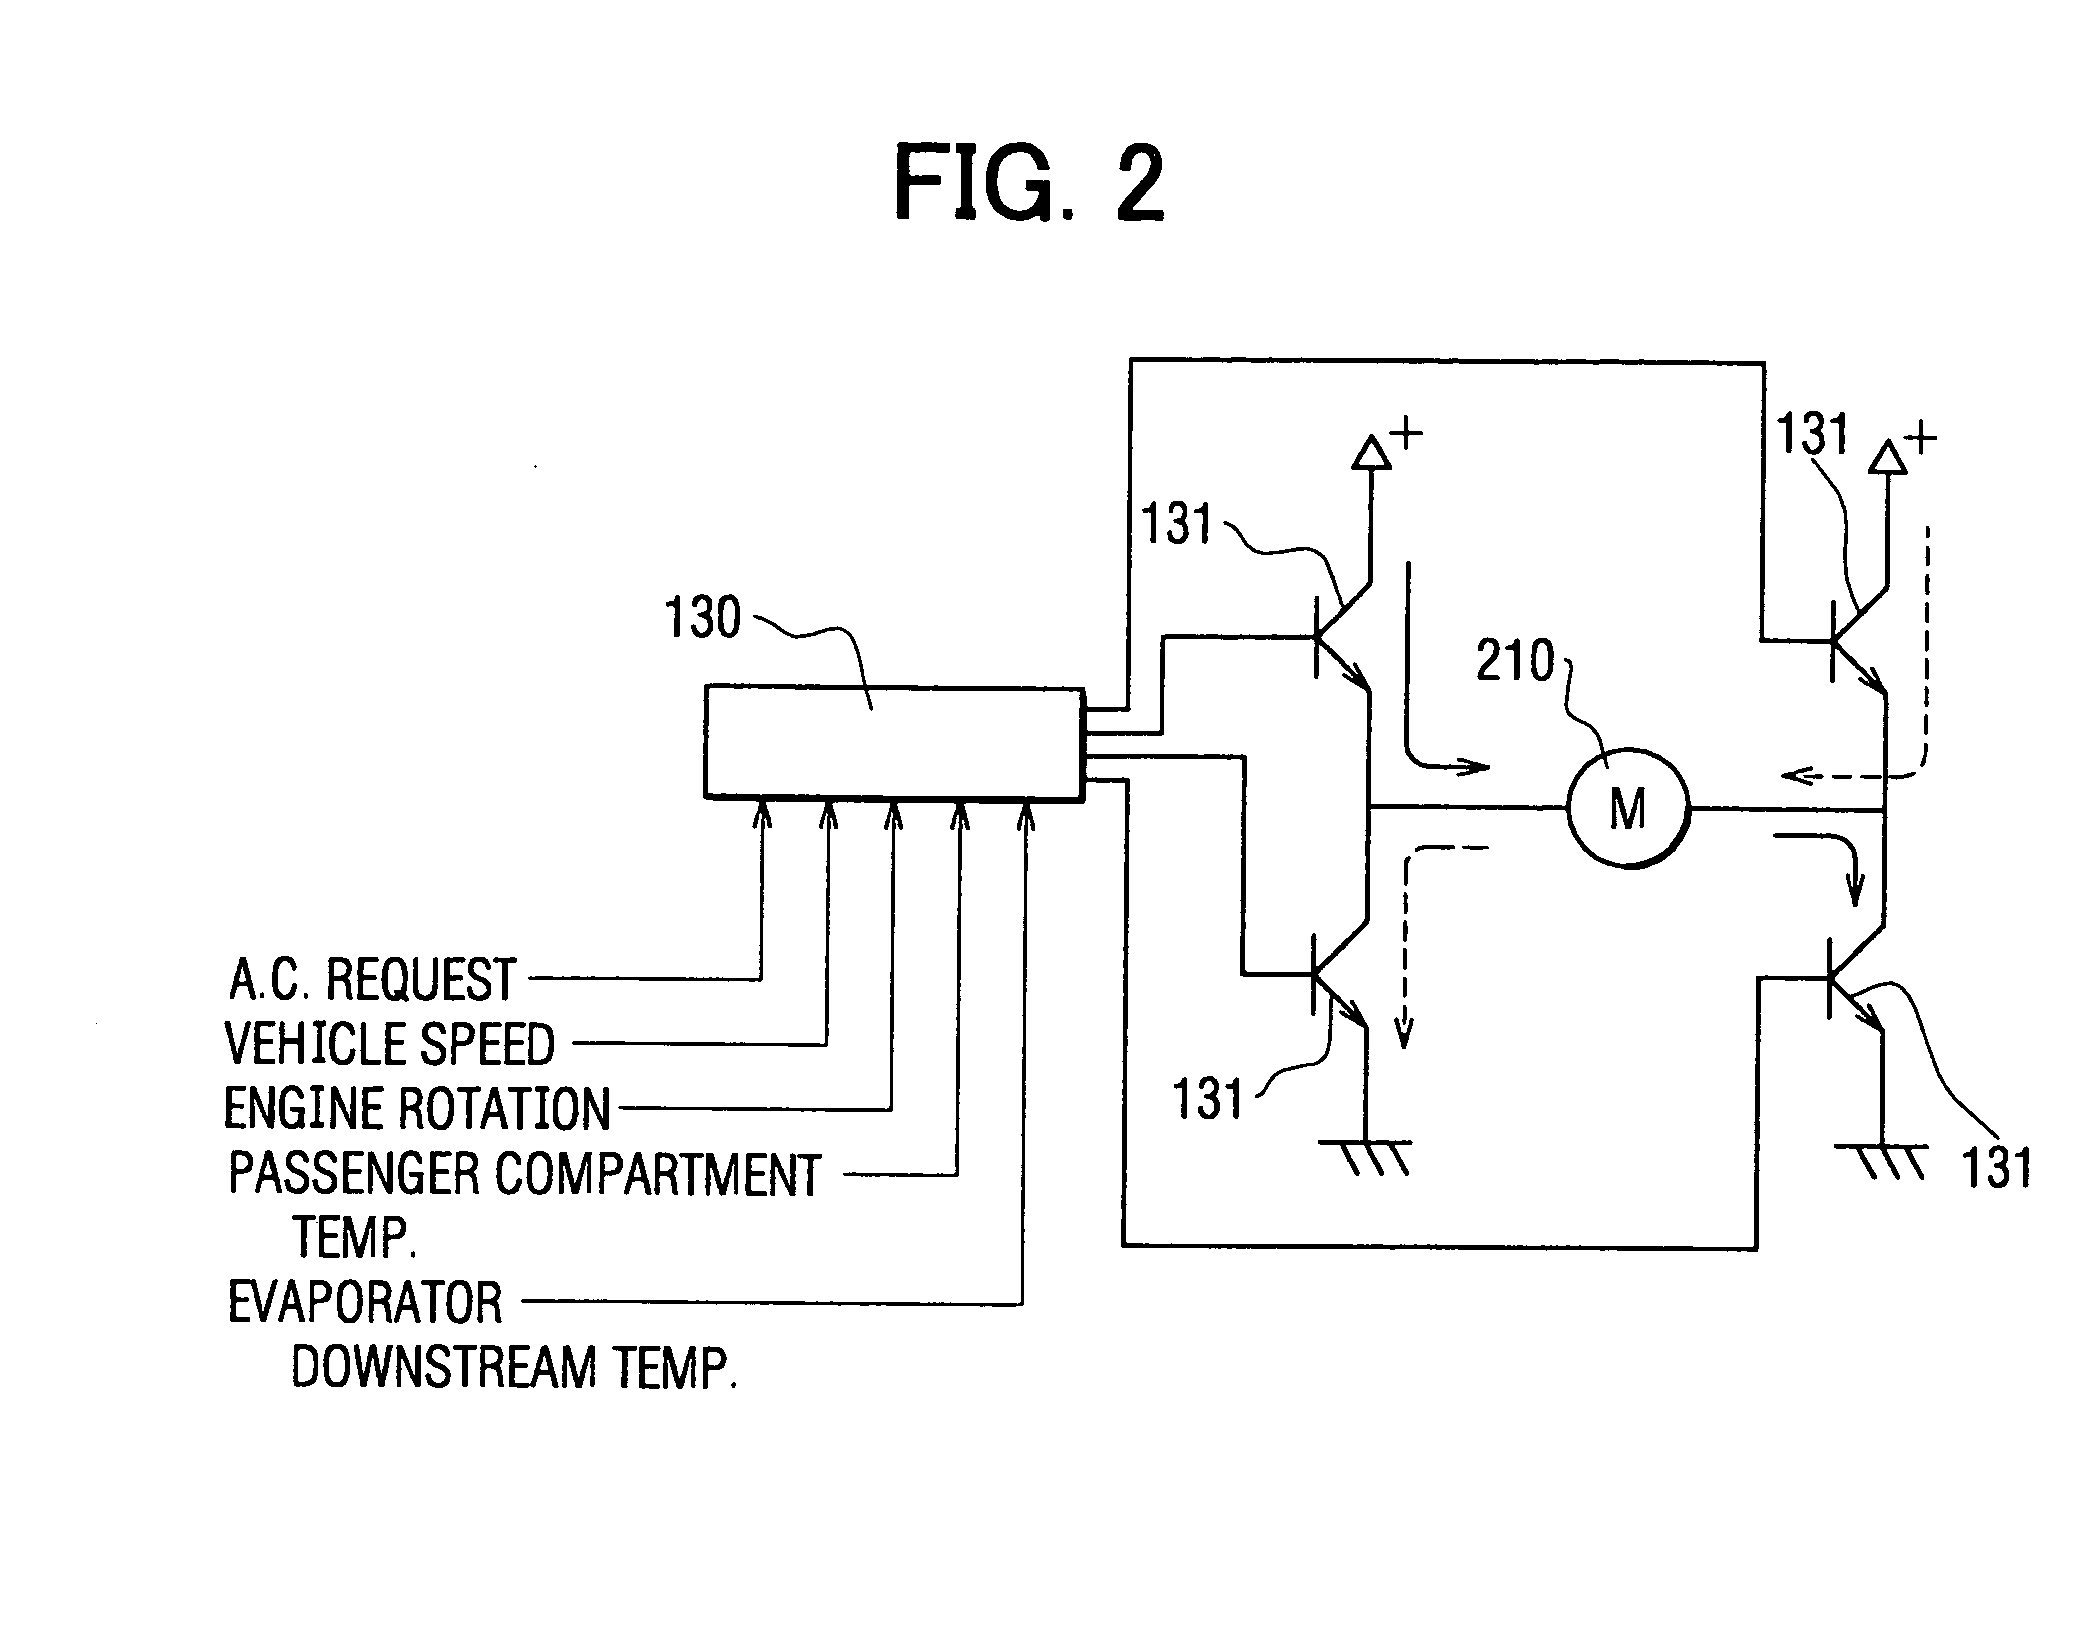 Air-conditioning apparatus including motor-driven compressor for idle stopping vehicles